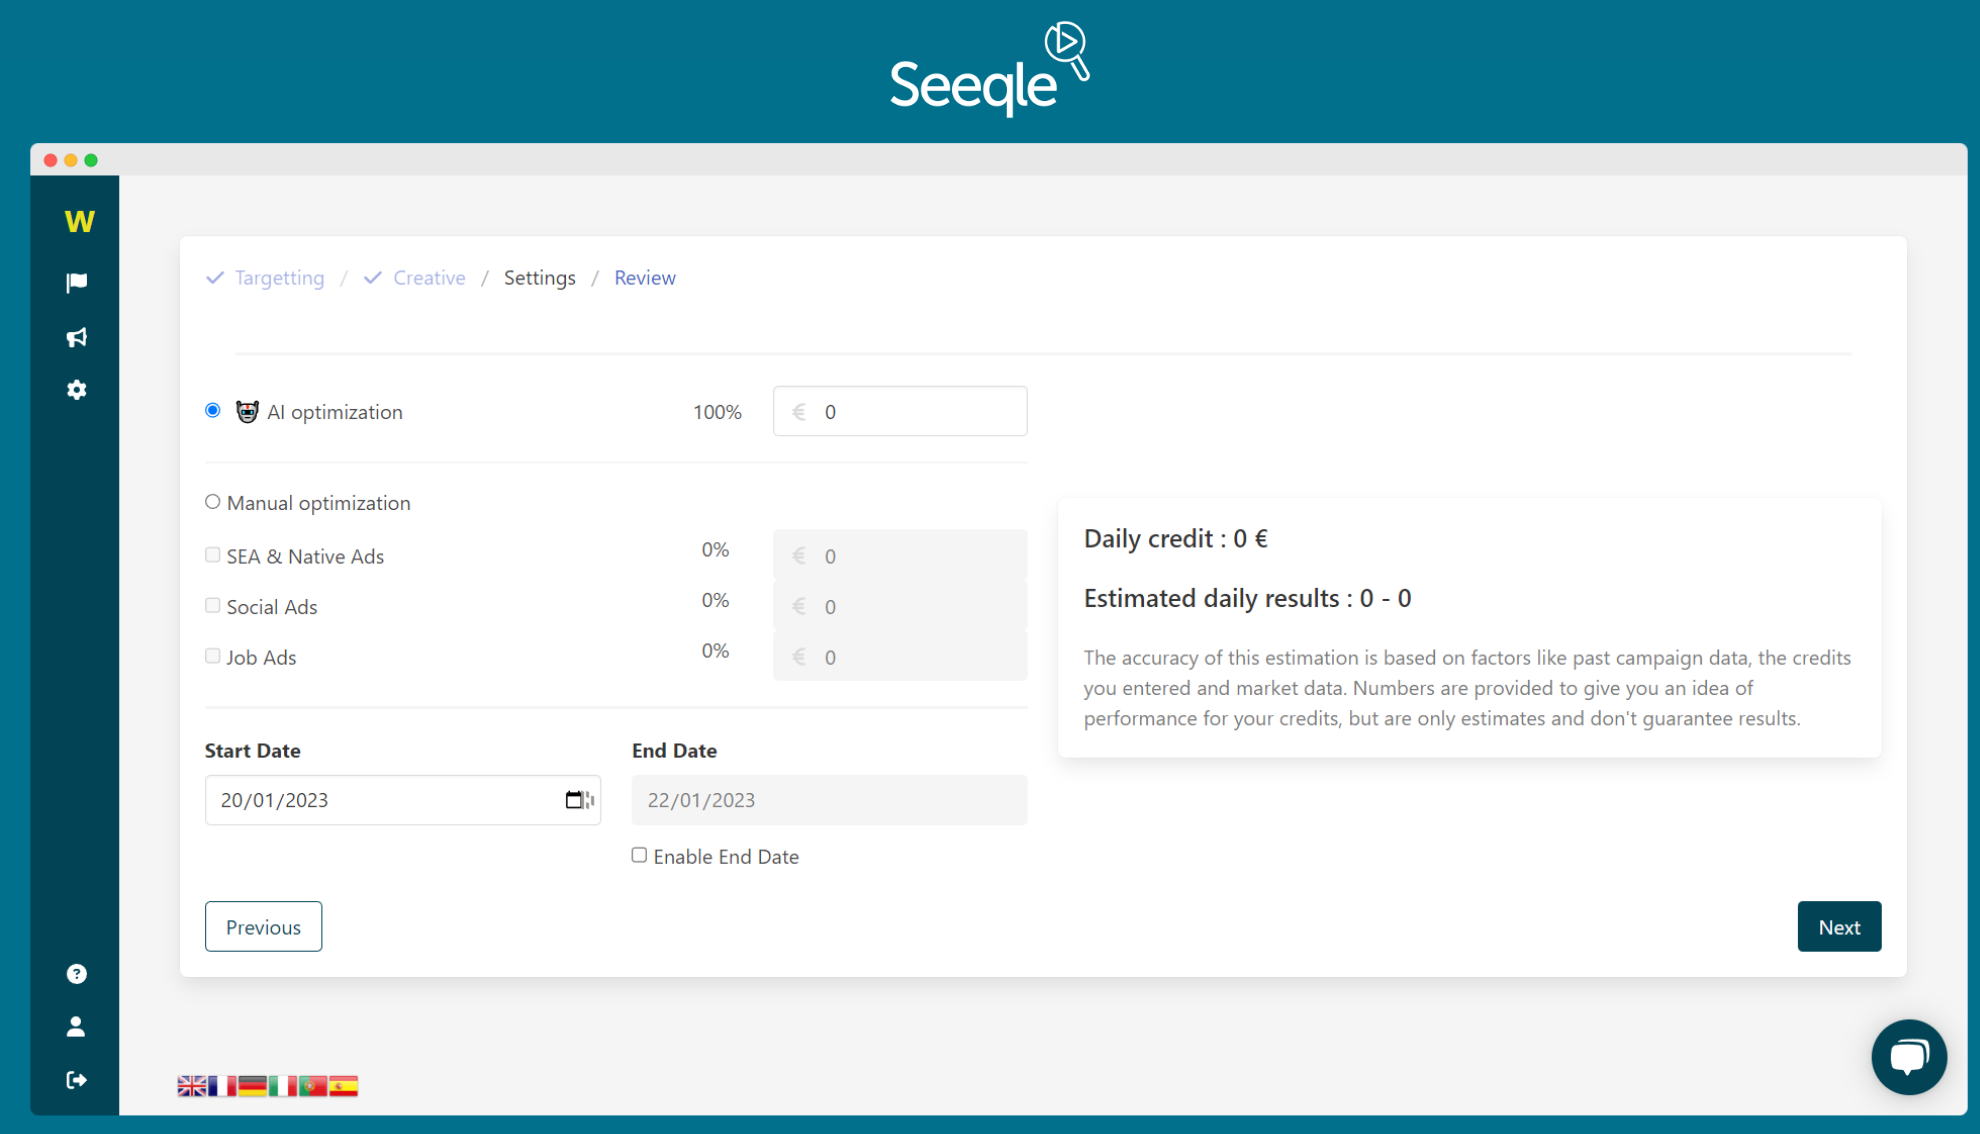 Seeqle - AI-based Programmatic Candidate Acquisition 2fc21846-a3cb-4139-b02a-5292d4cc5bf4.png